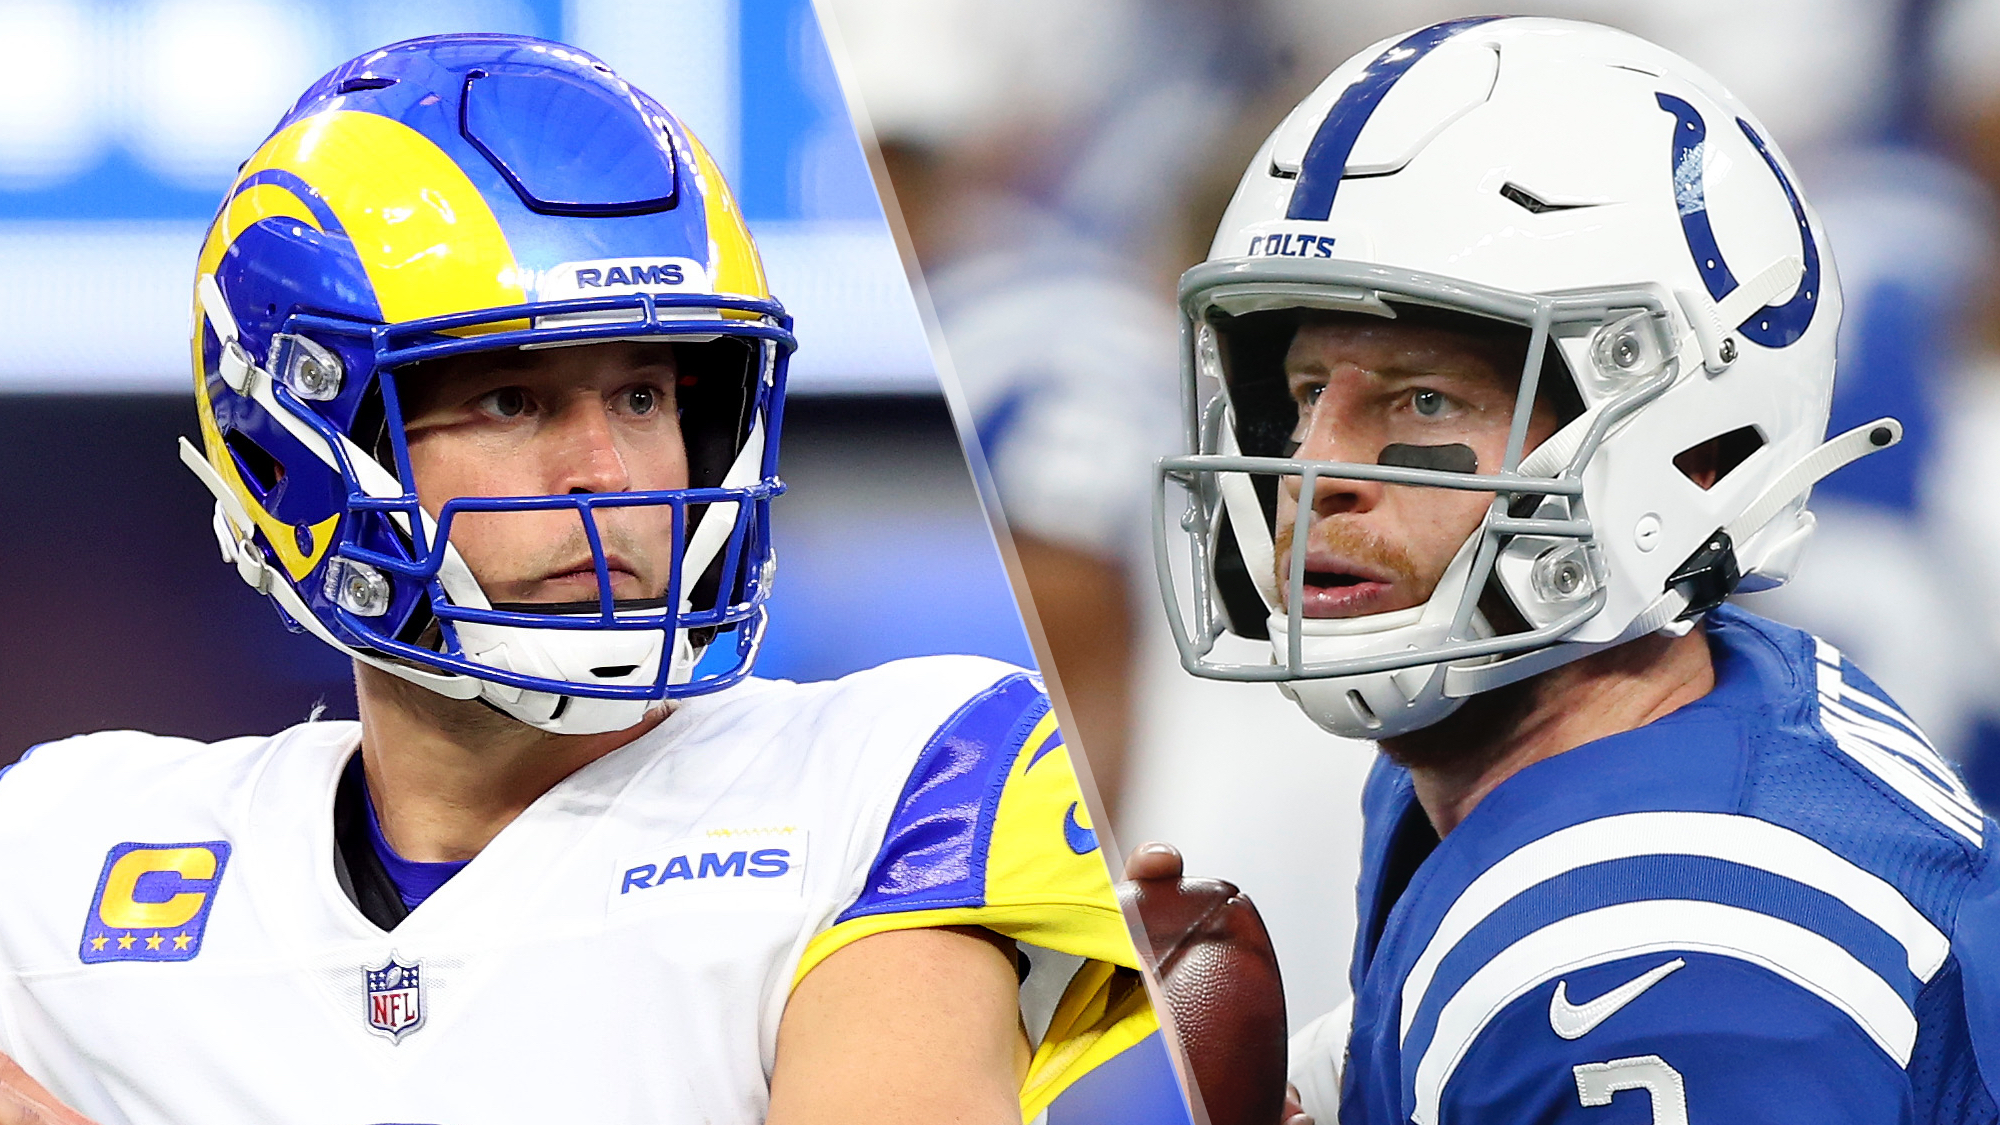 Rams vs Colts live stream: How to watch NFL week 2 game online